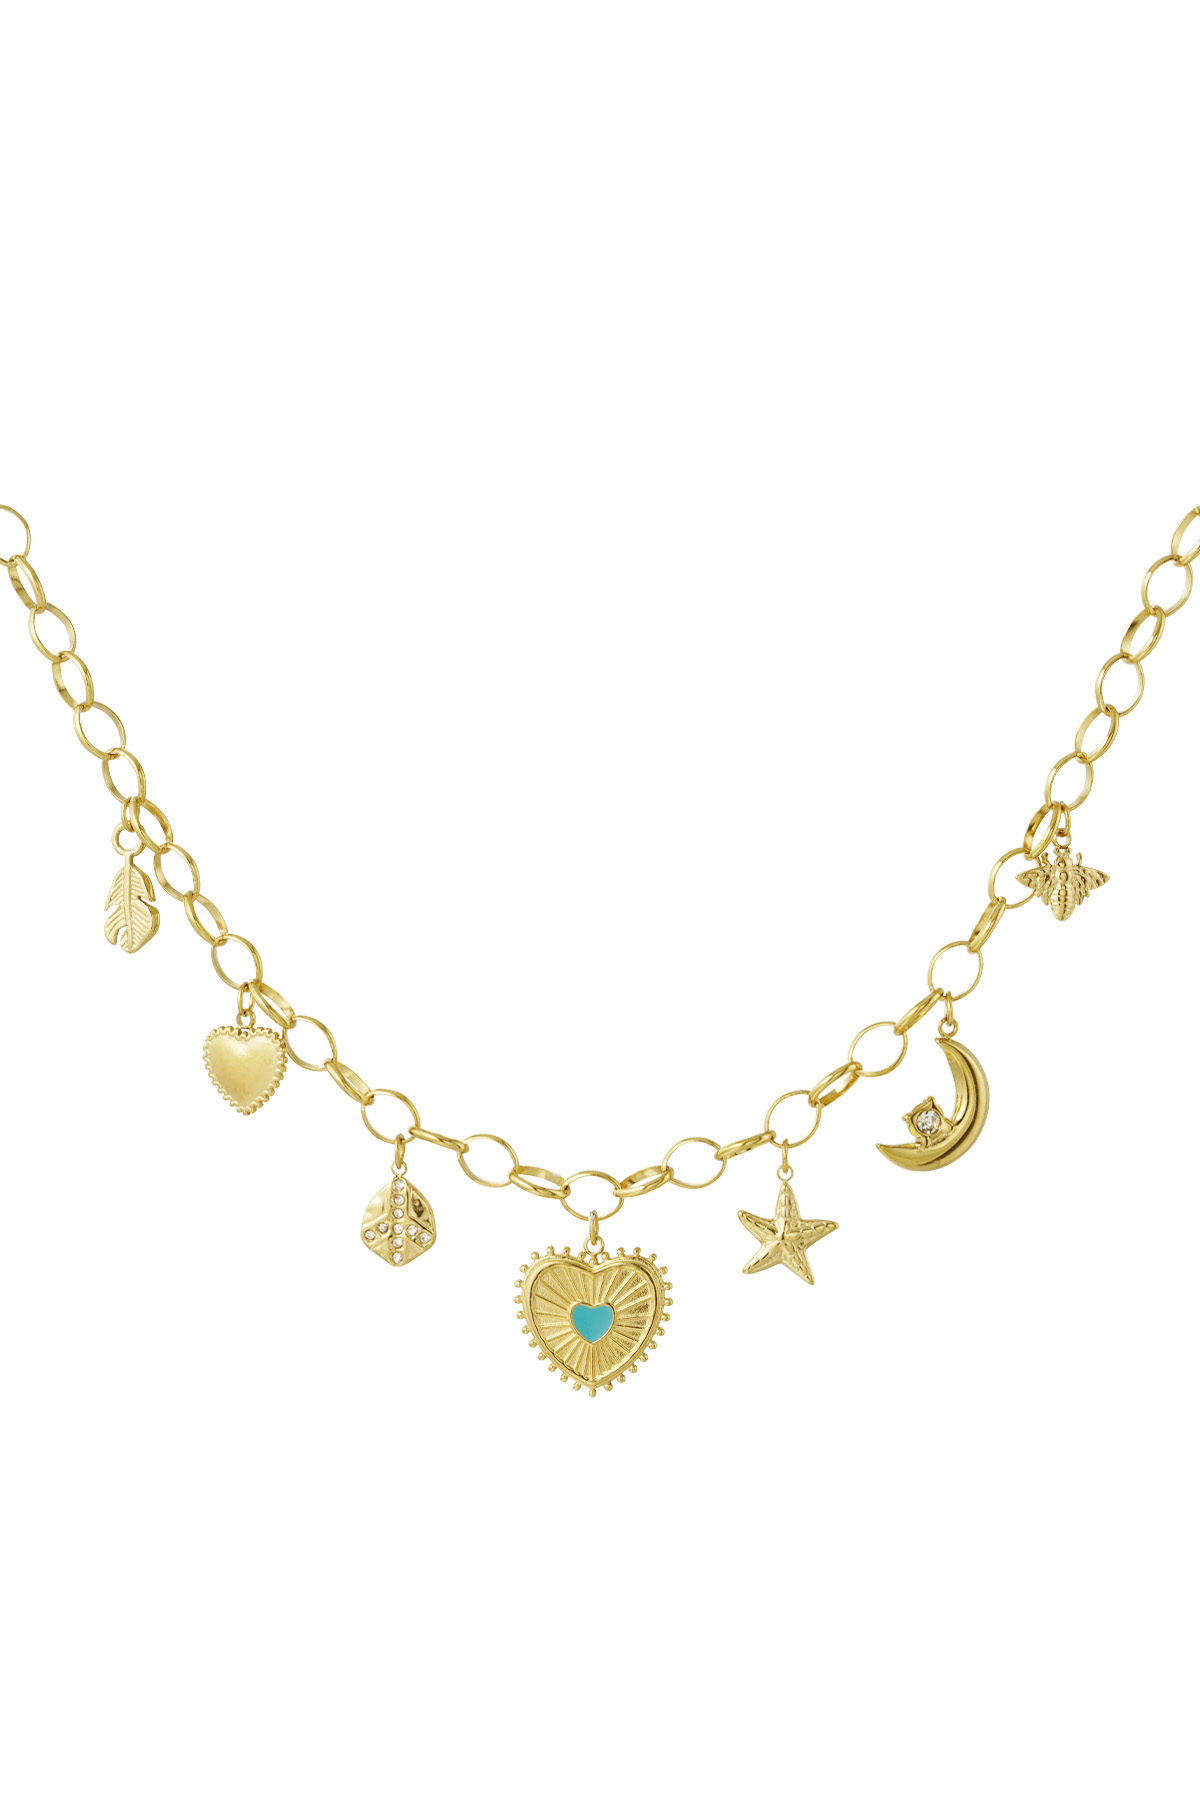 Sunny love charm necklace - gold 